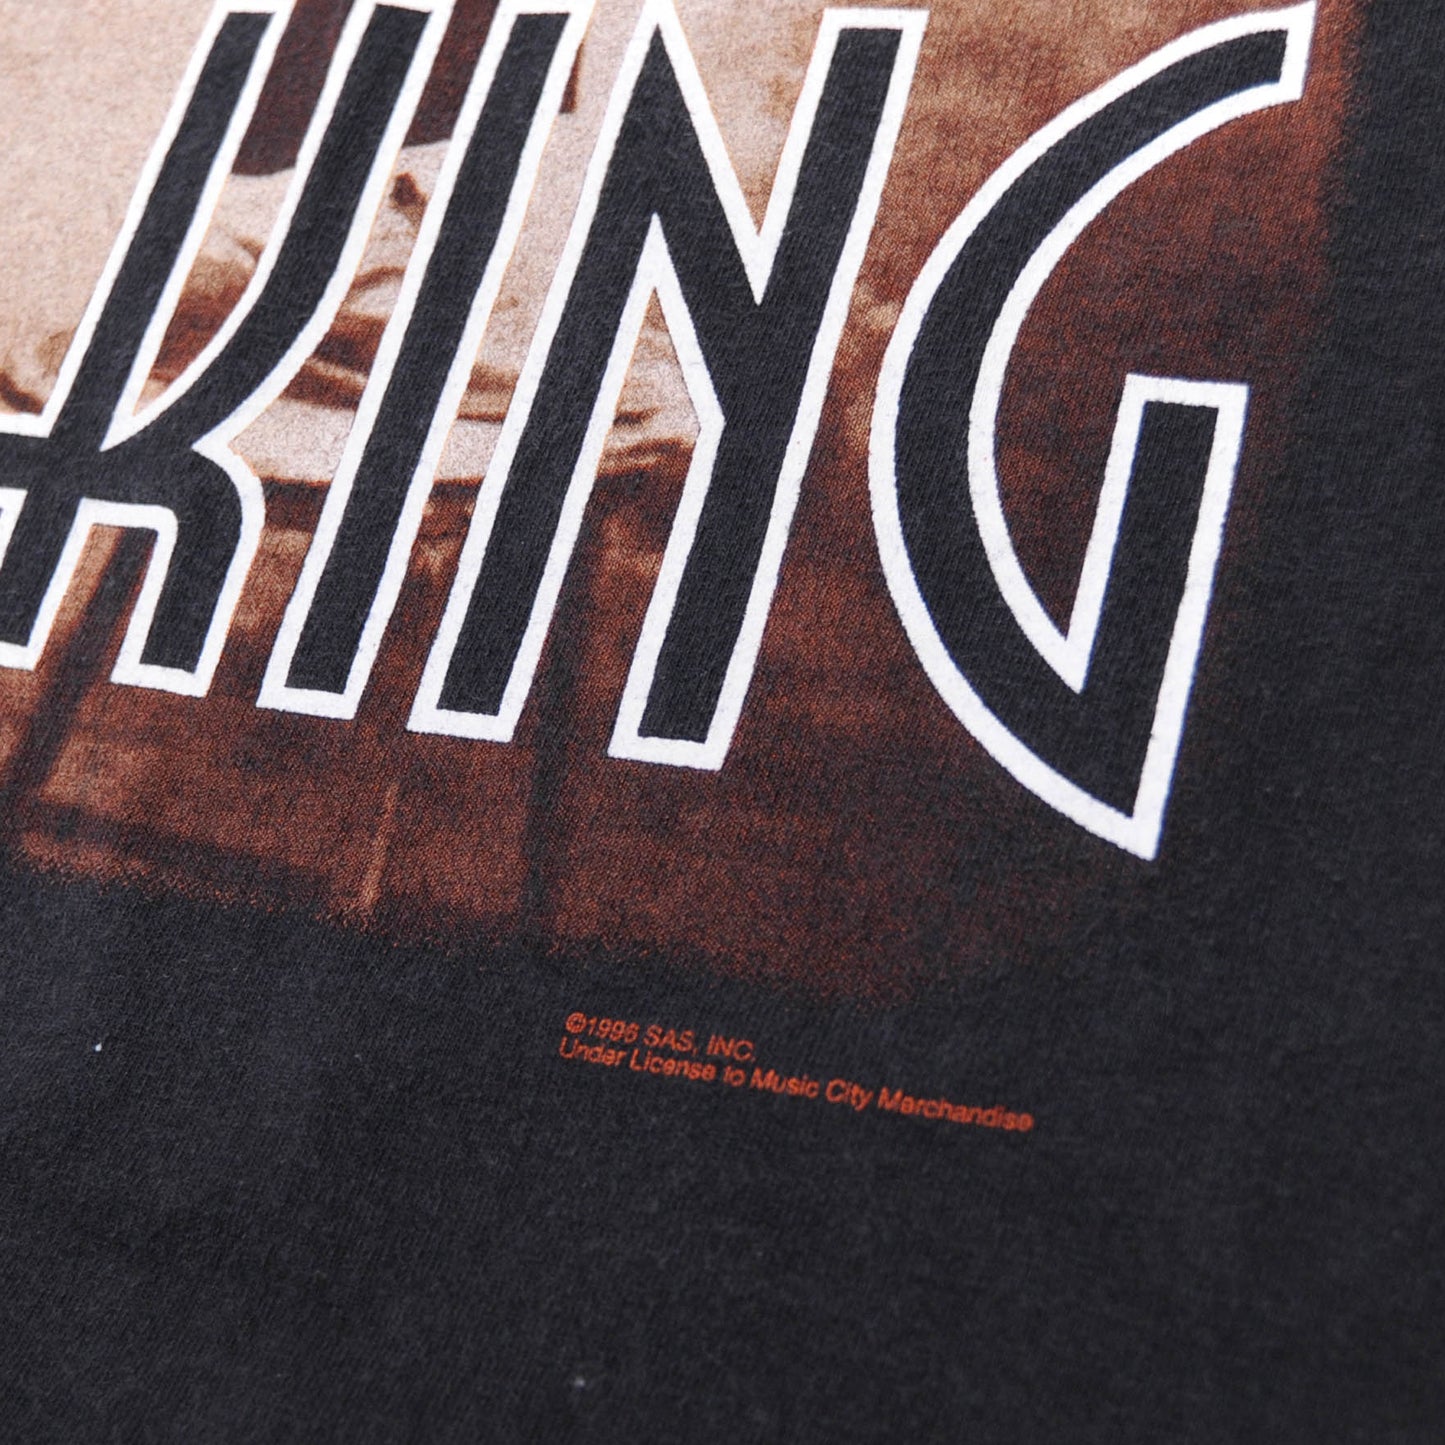 90's BB.KING"KING OF THE BLUES"ツアーTシャツ/A3426T-S